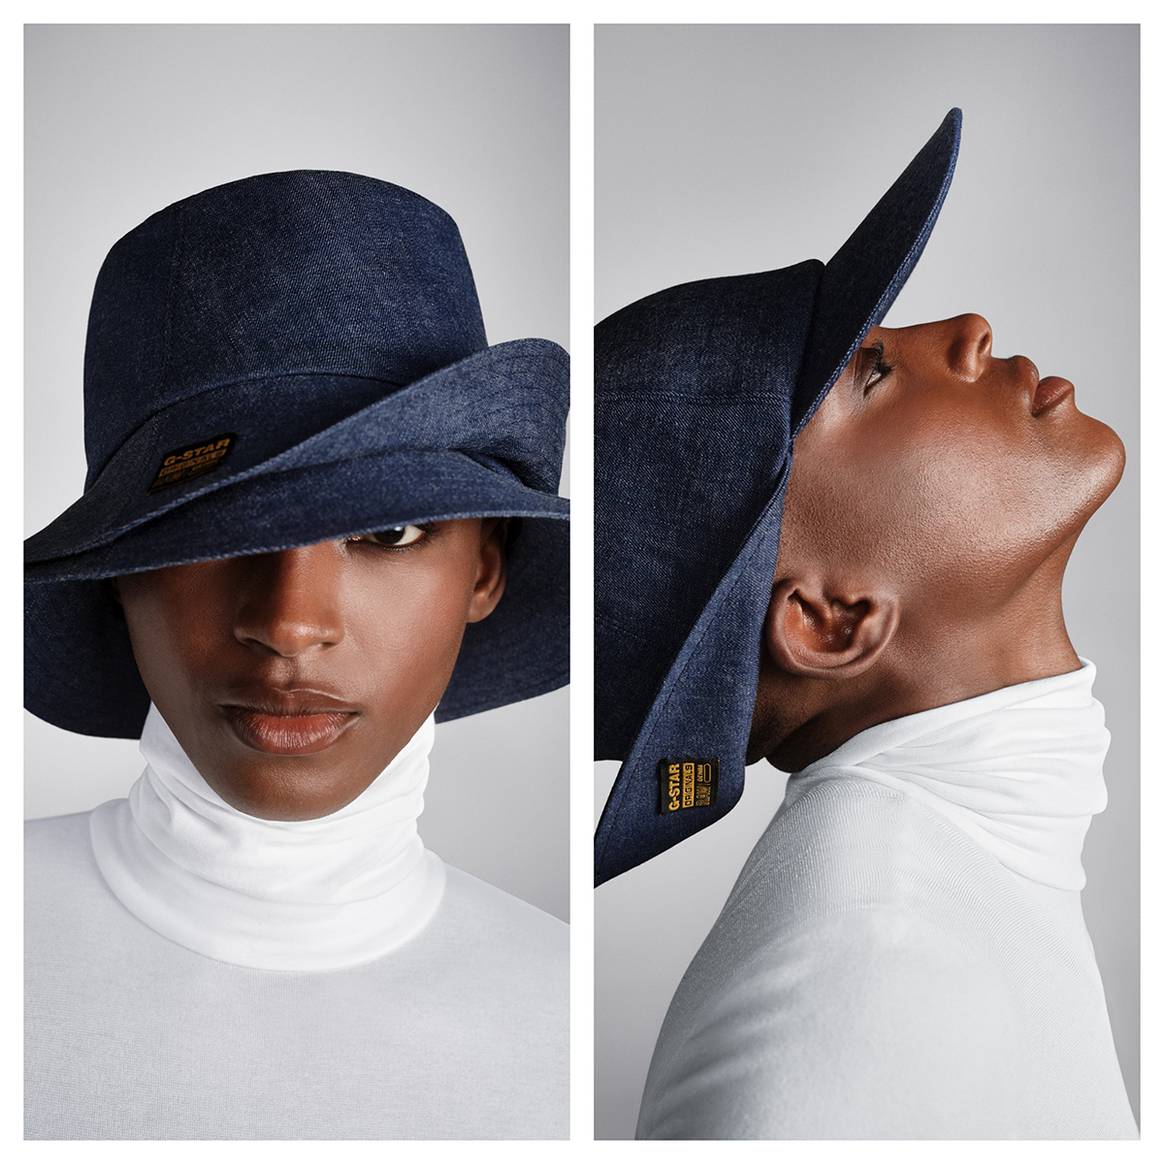 G-Star RAW and master milliner Stephen Jones join forces to create denim headwear